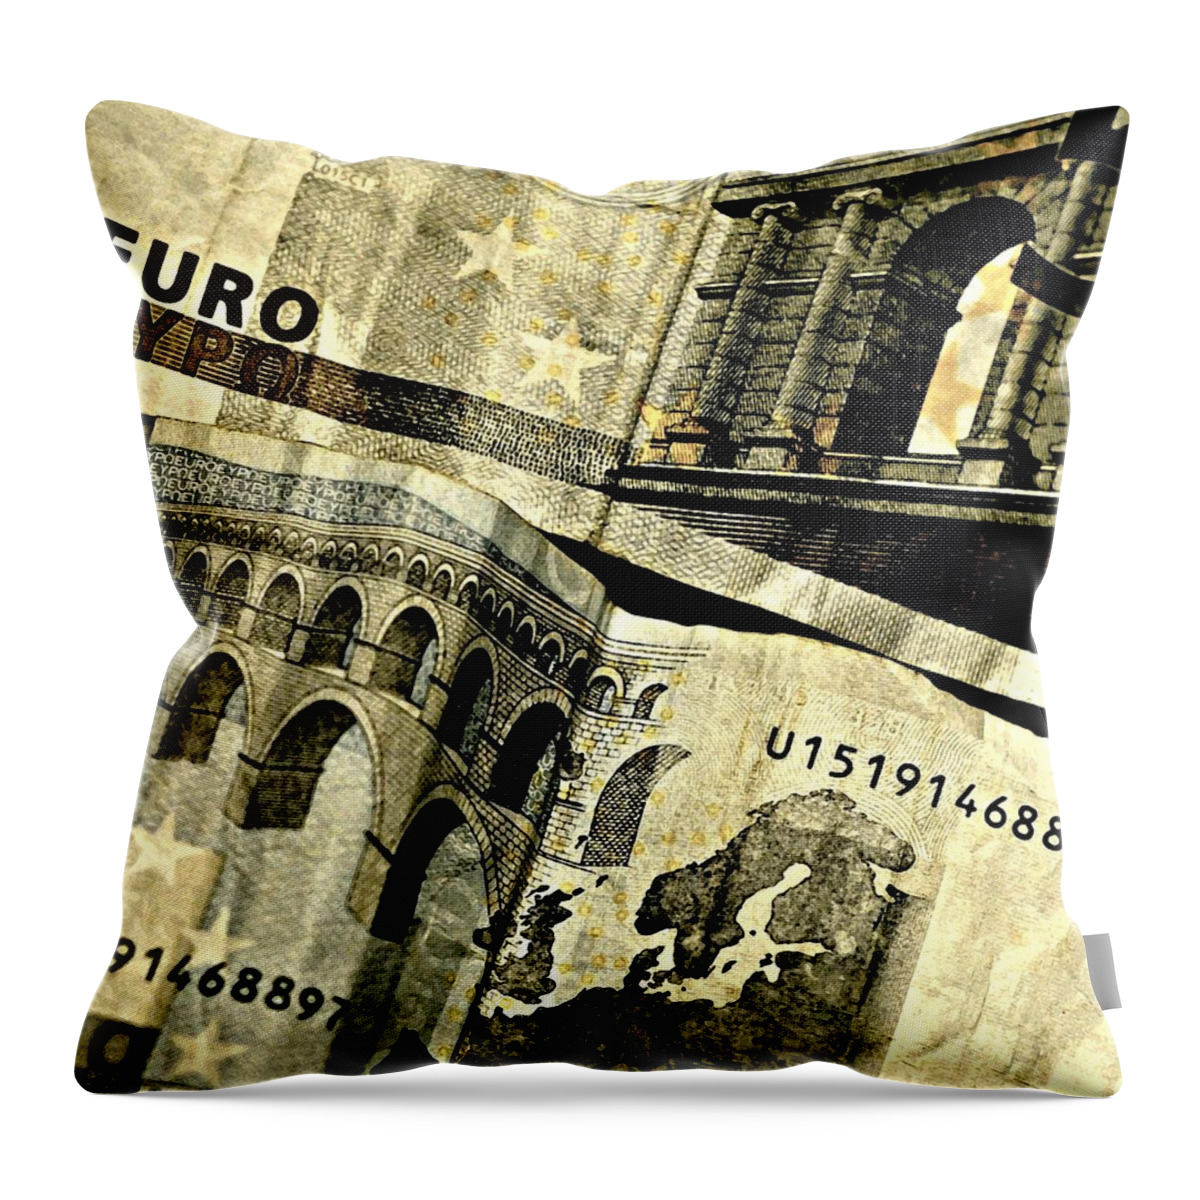 Euro Throw Pillow featuring the photograph Euro by Diana Angstadt